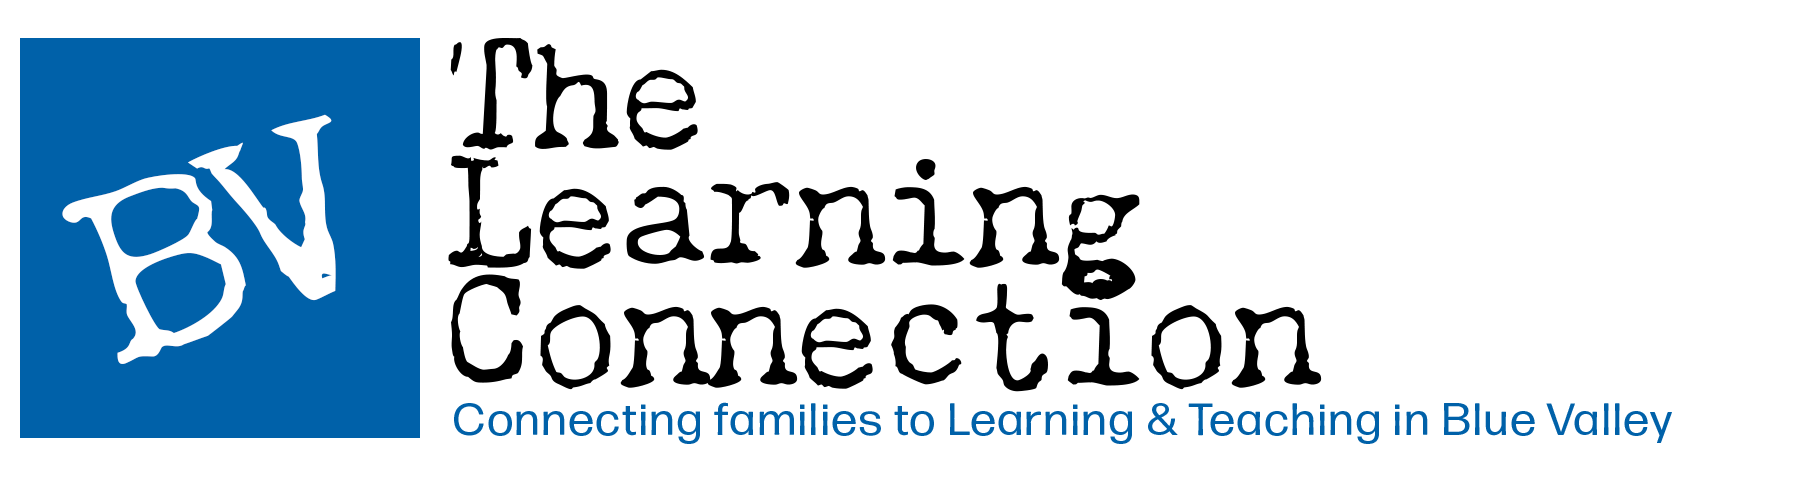 The Learning Connection. Connecting families to learning and teaching in Blue Valley.